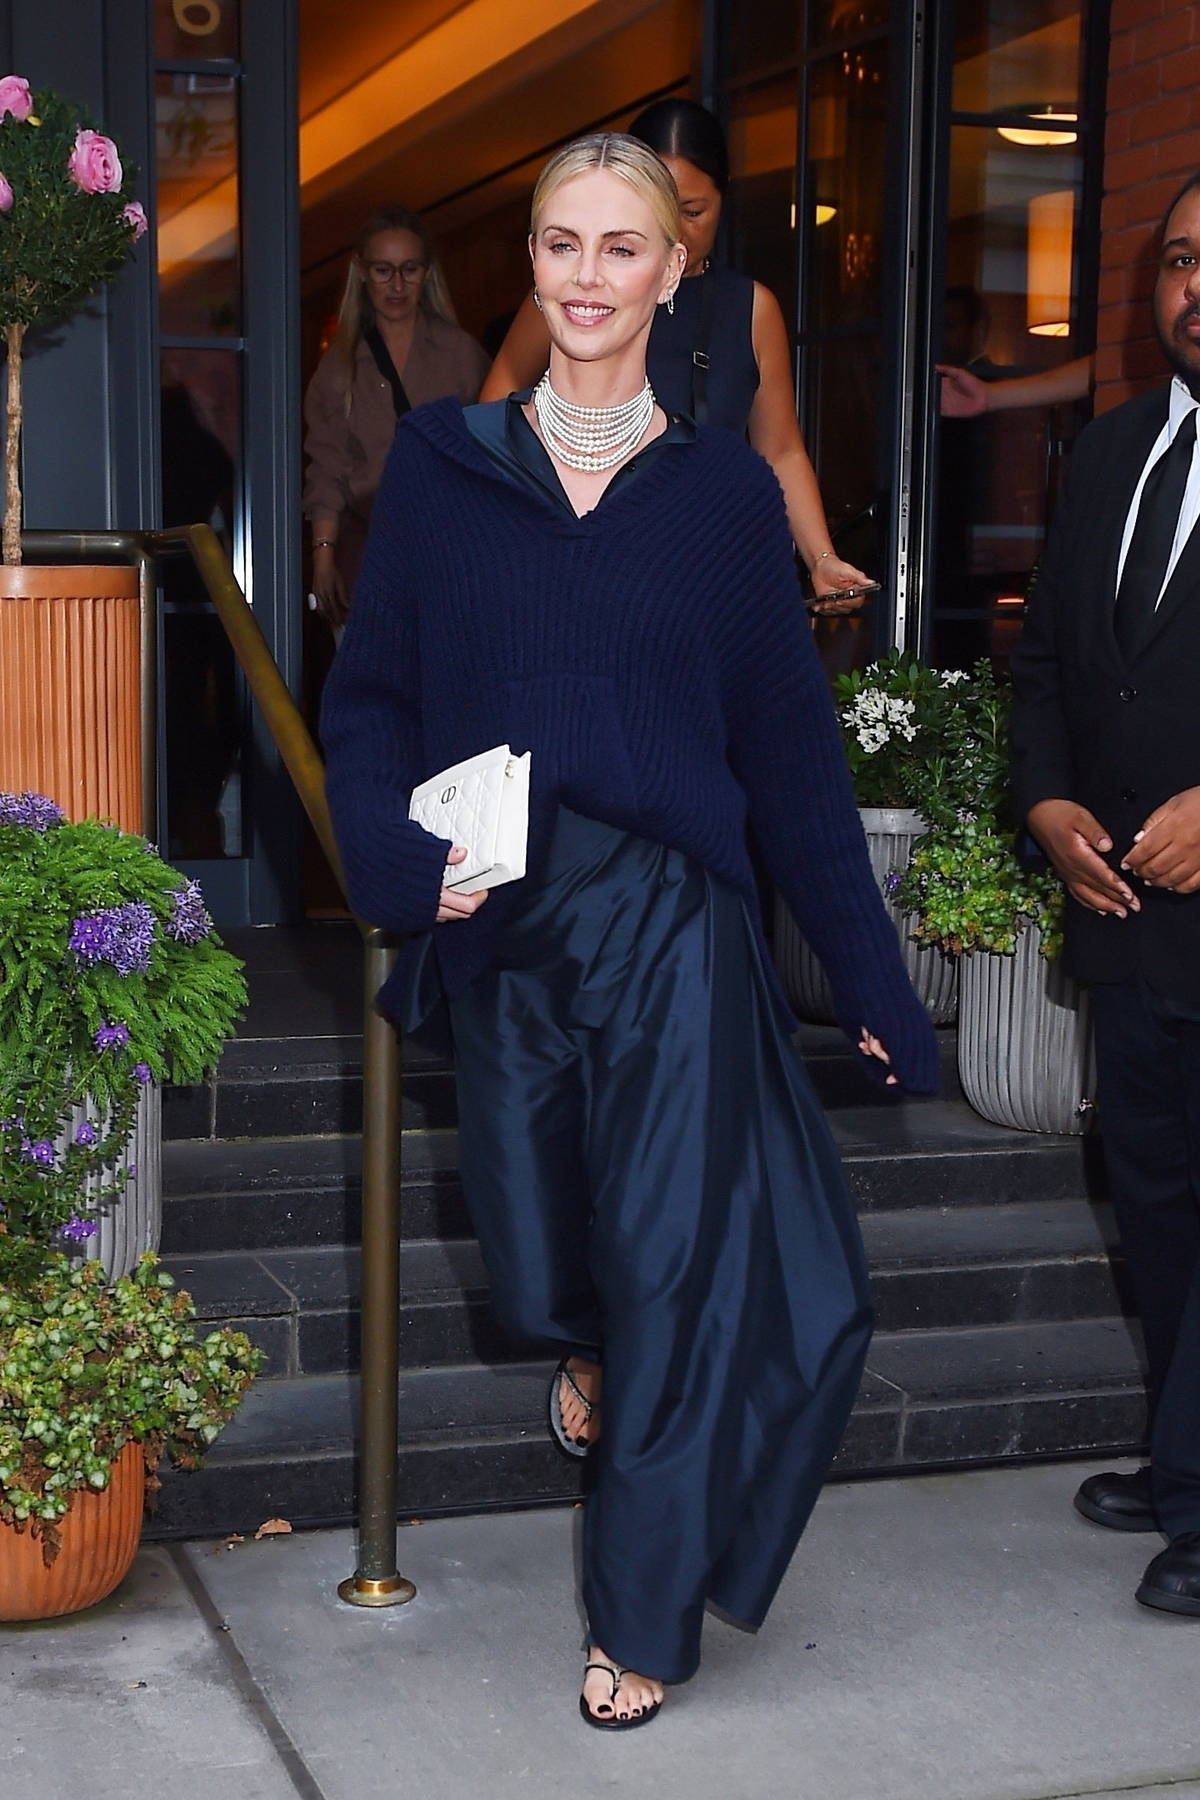 Charlize Theron goes casual chic in navy blue at celebrity hotspot